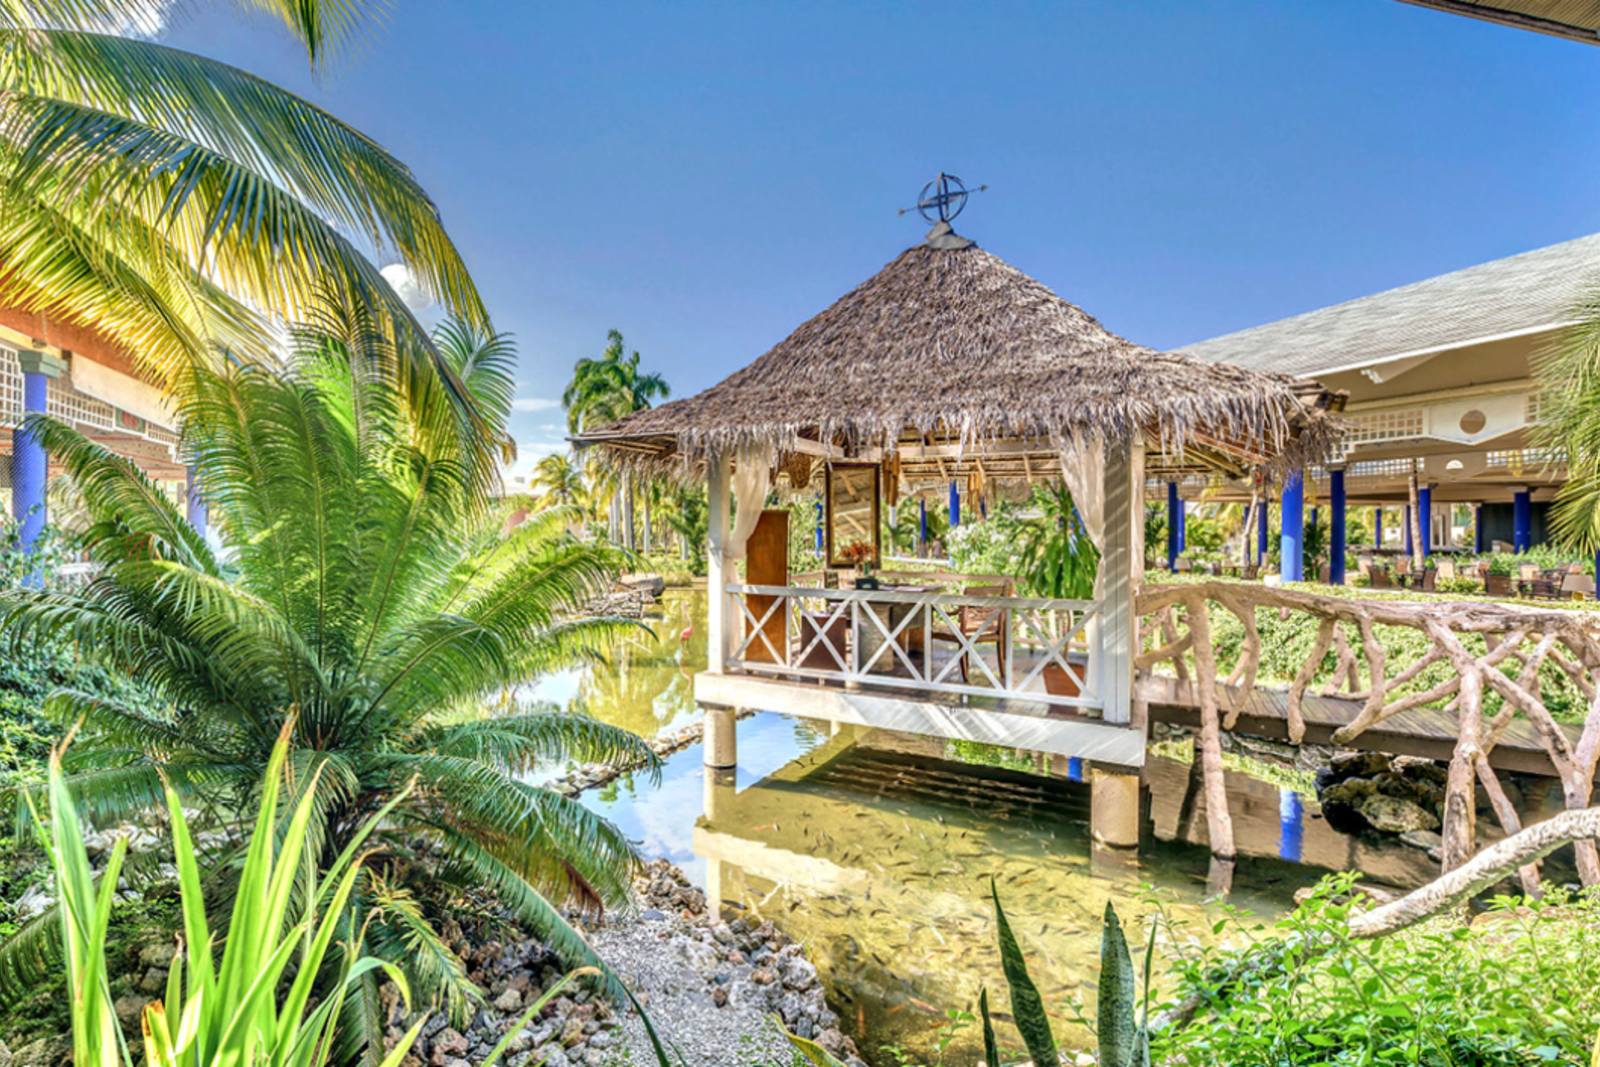 The adults-only all-inclusive Paradisus Río de Oro Resort & Spa in Guardalavaca, Cuba is surrounded by nature